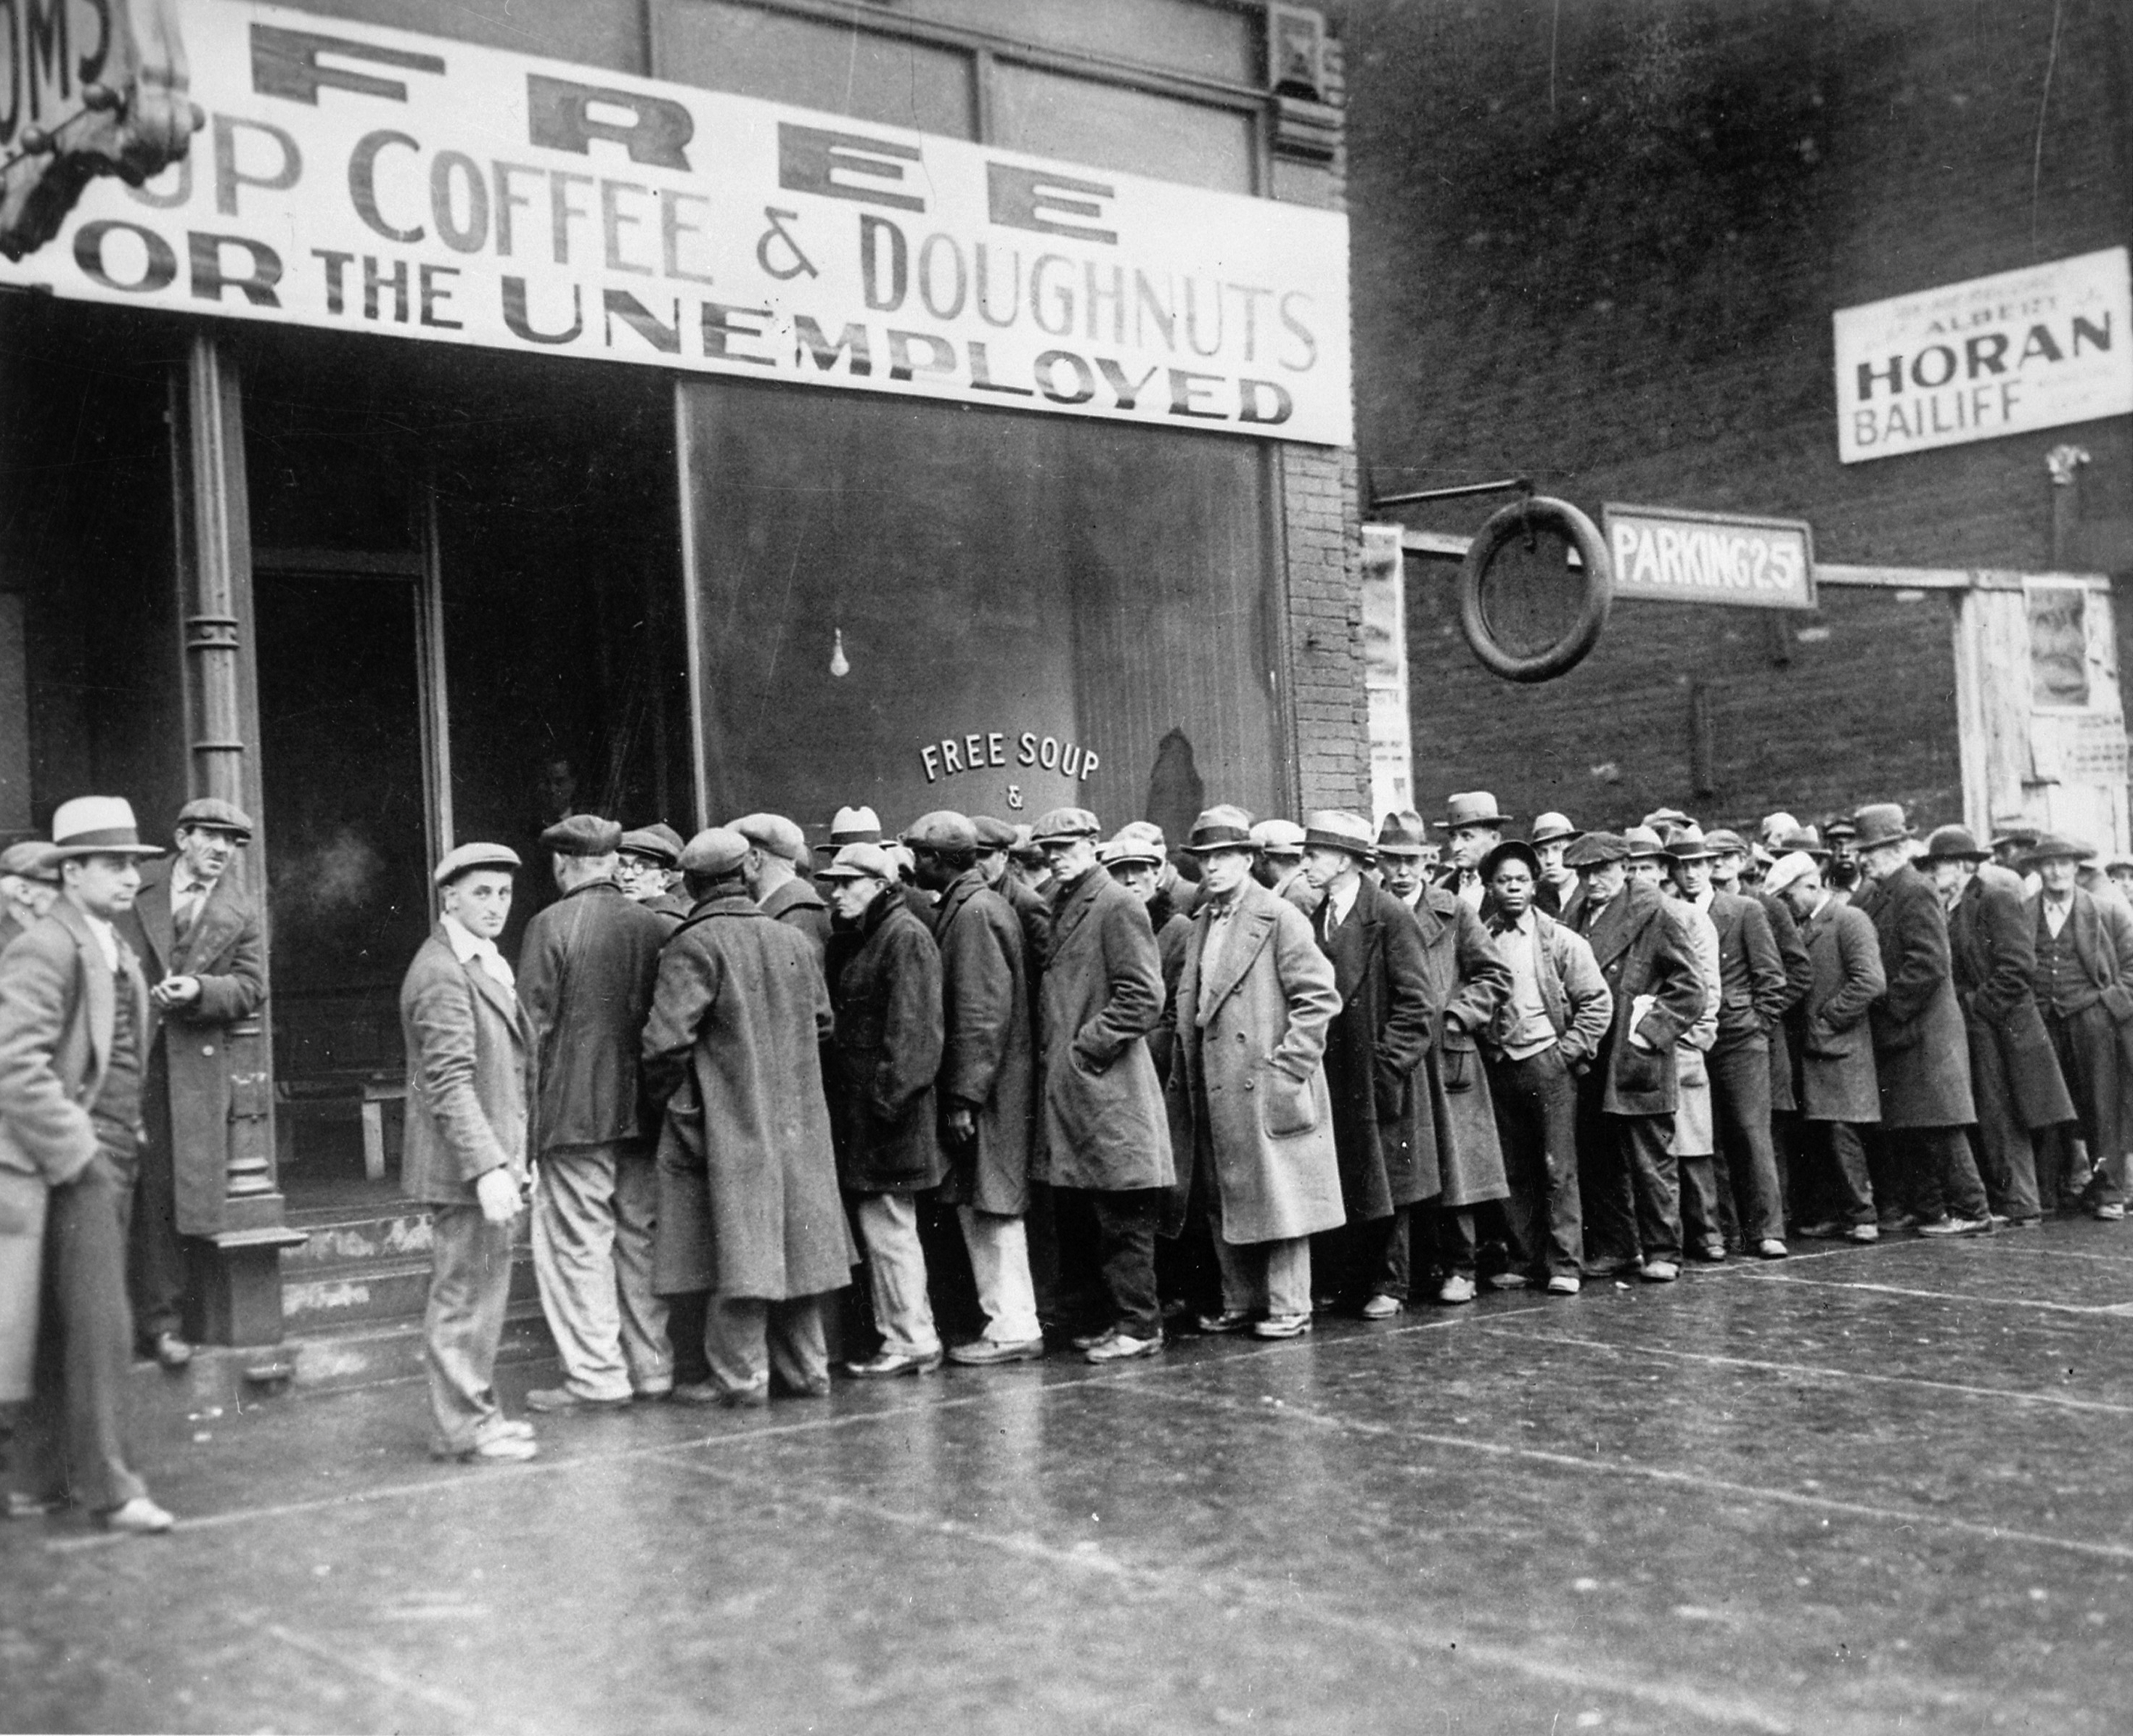 Unemployed_men_queued_outside_a_depression_soup_kitchen_opened_in_Chicago_by_Al_Capone,_02-1931_-_NARA_-_541927.jpg